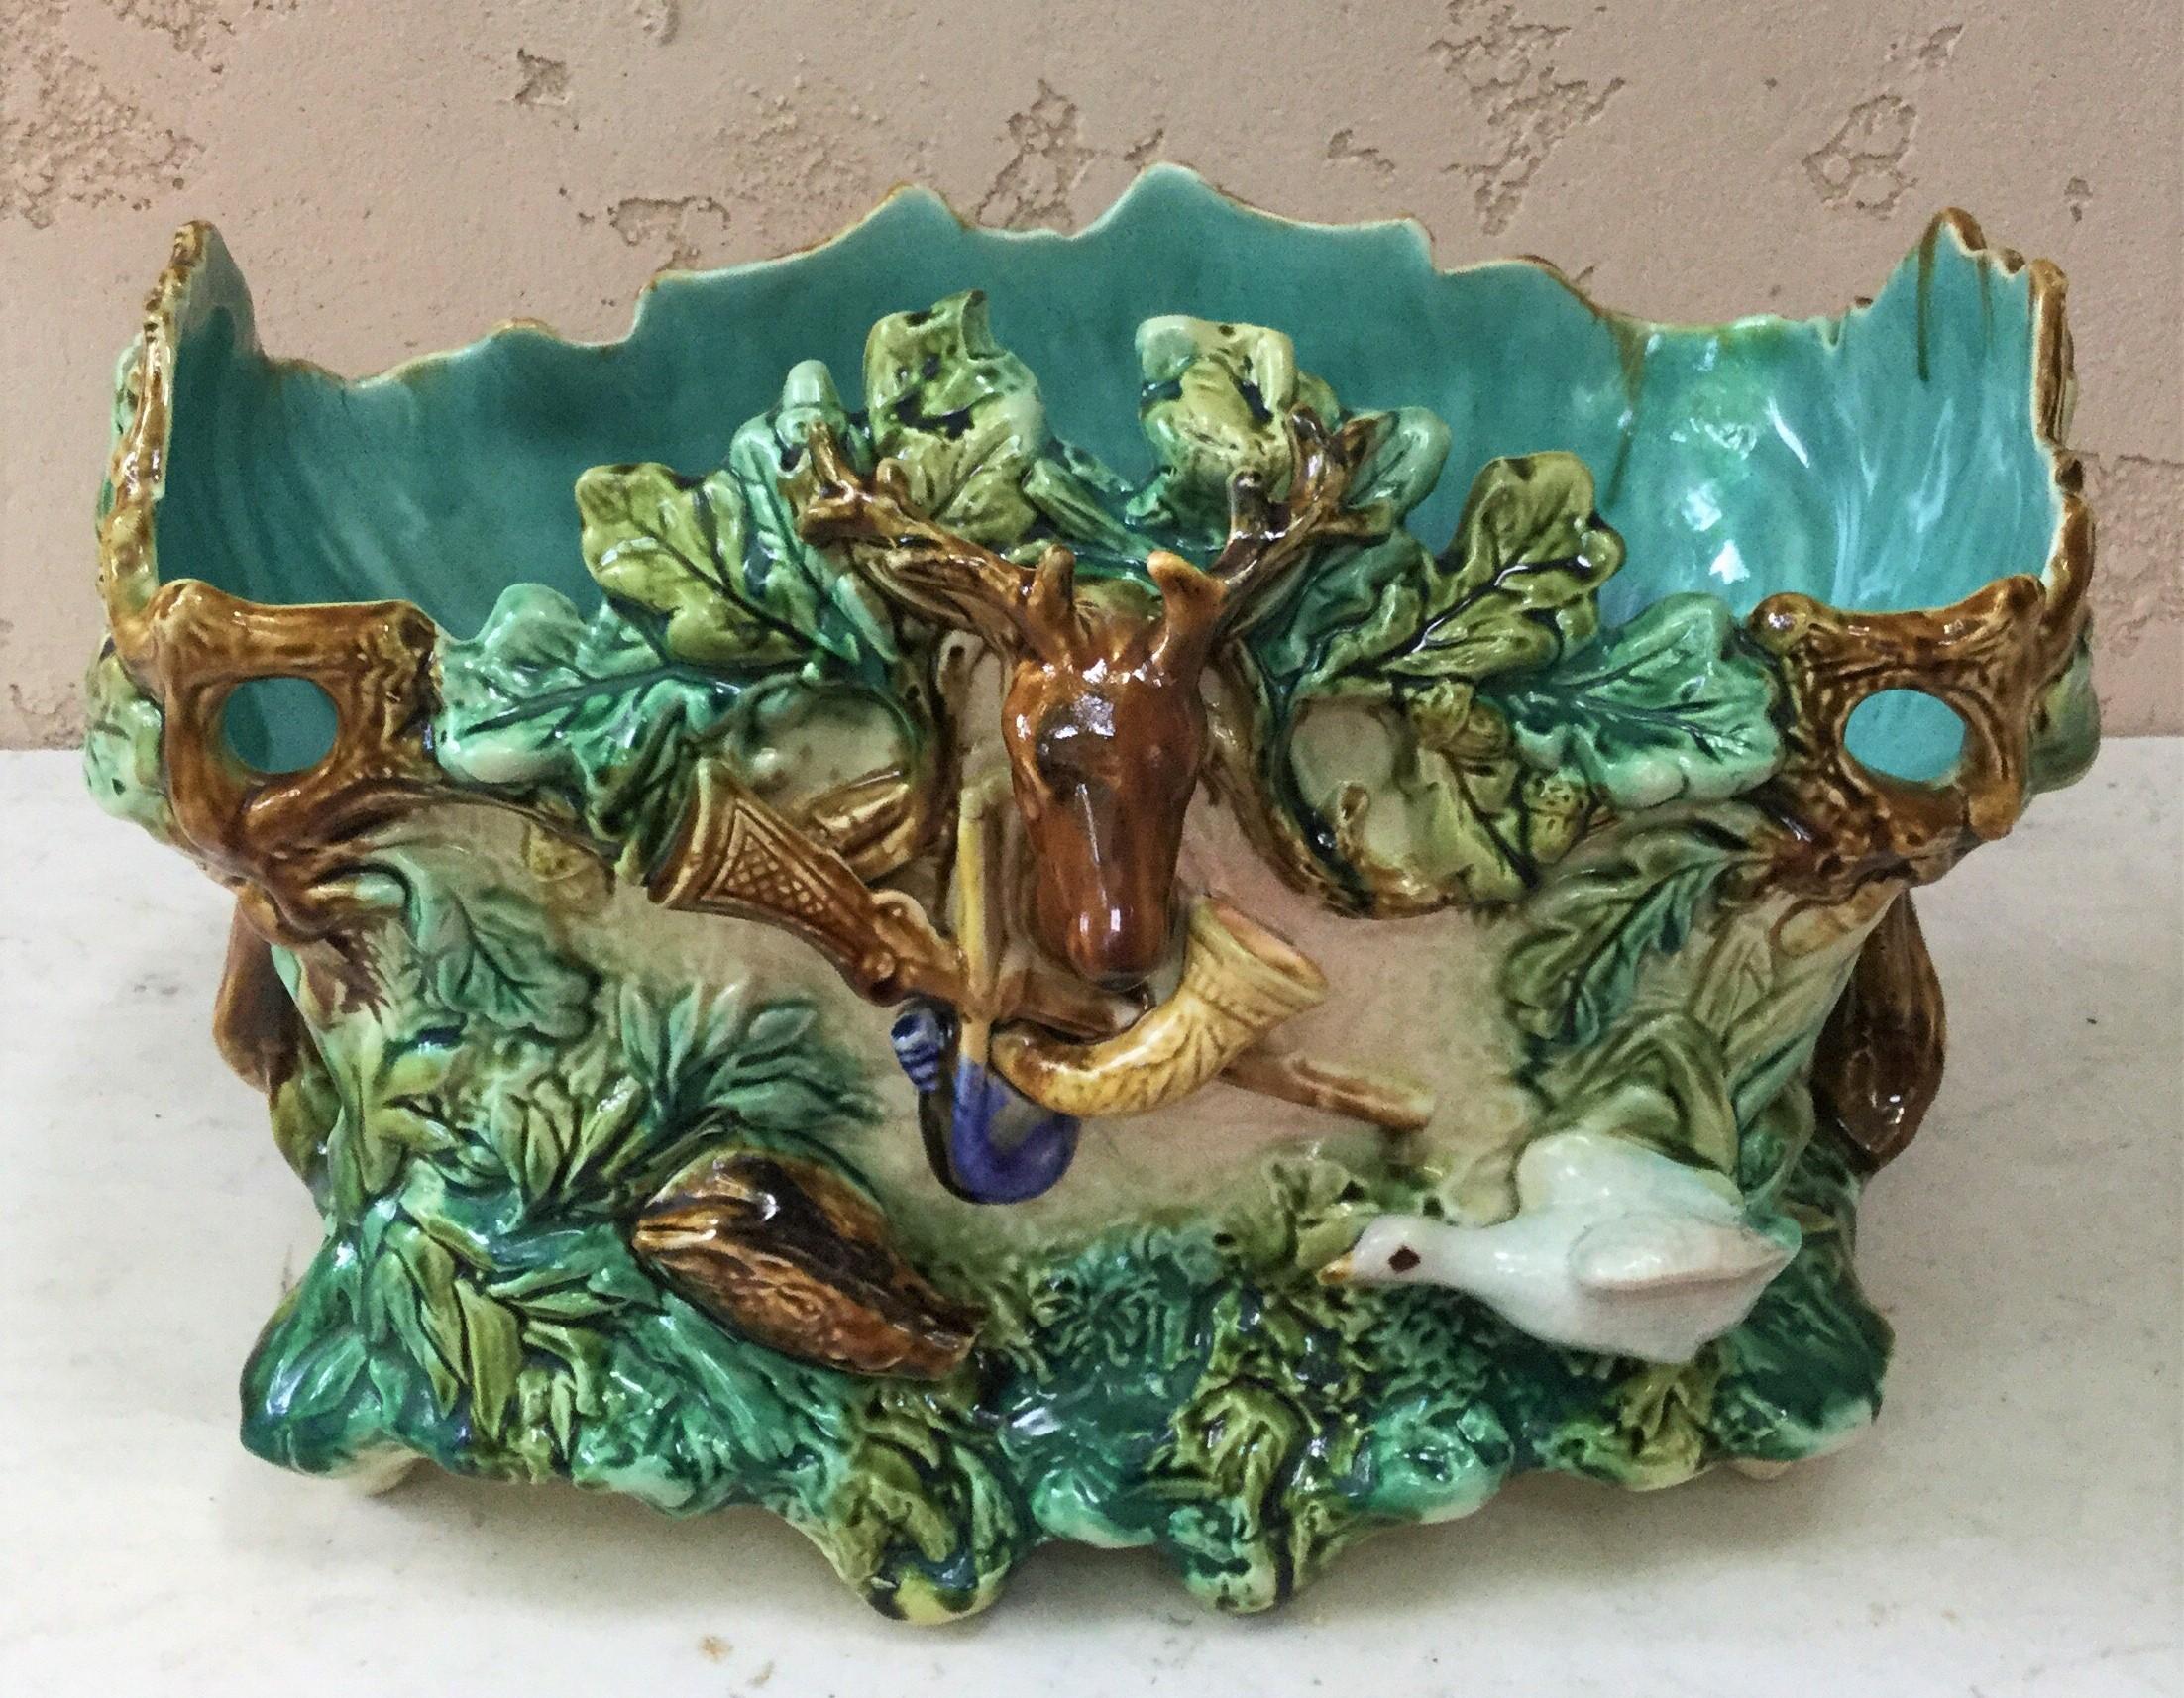 19th century large rectangular Majolica hunt jardinière signed Onnaing.
The planter is decorated with a deer head on the front , oak leaves and acorns , hunting symboles( gamebag, horn and carbine ) on the front also a boar head and a goose.